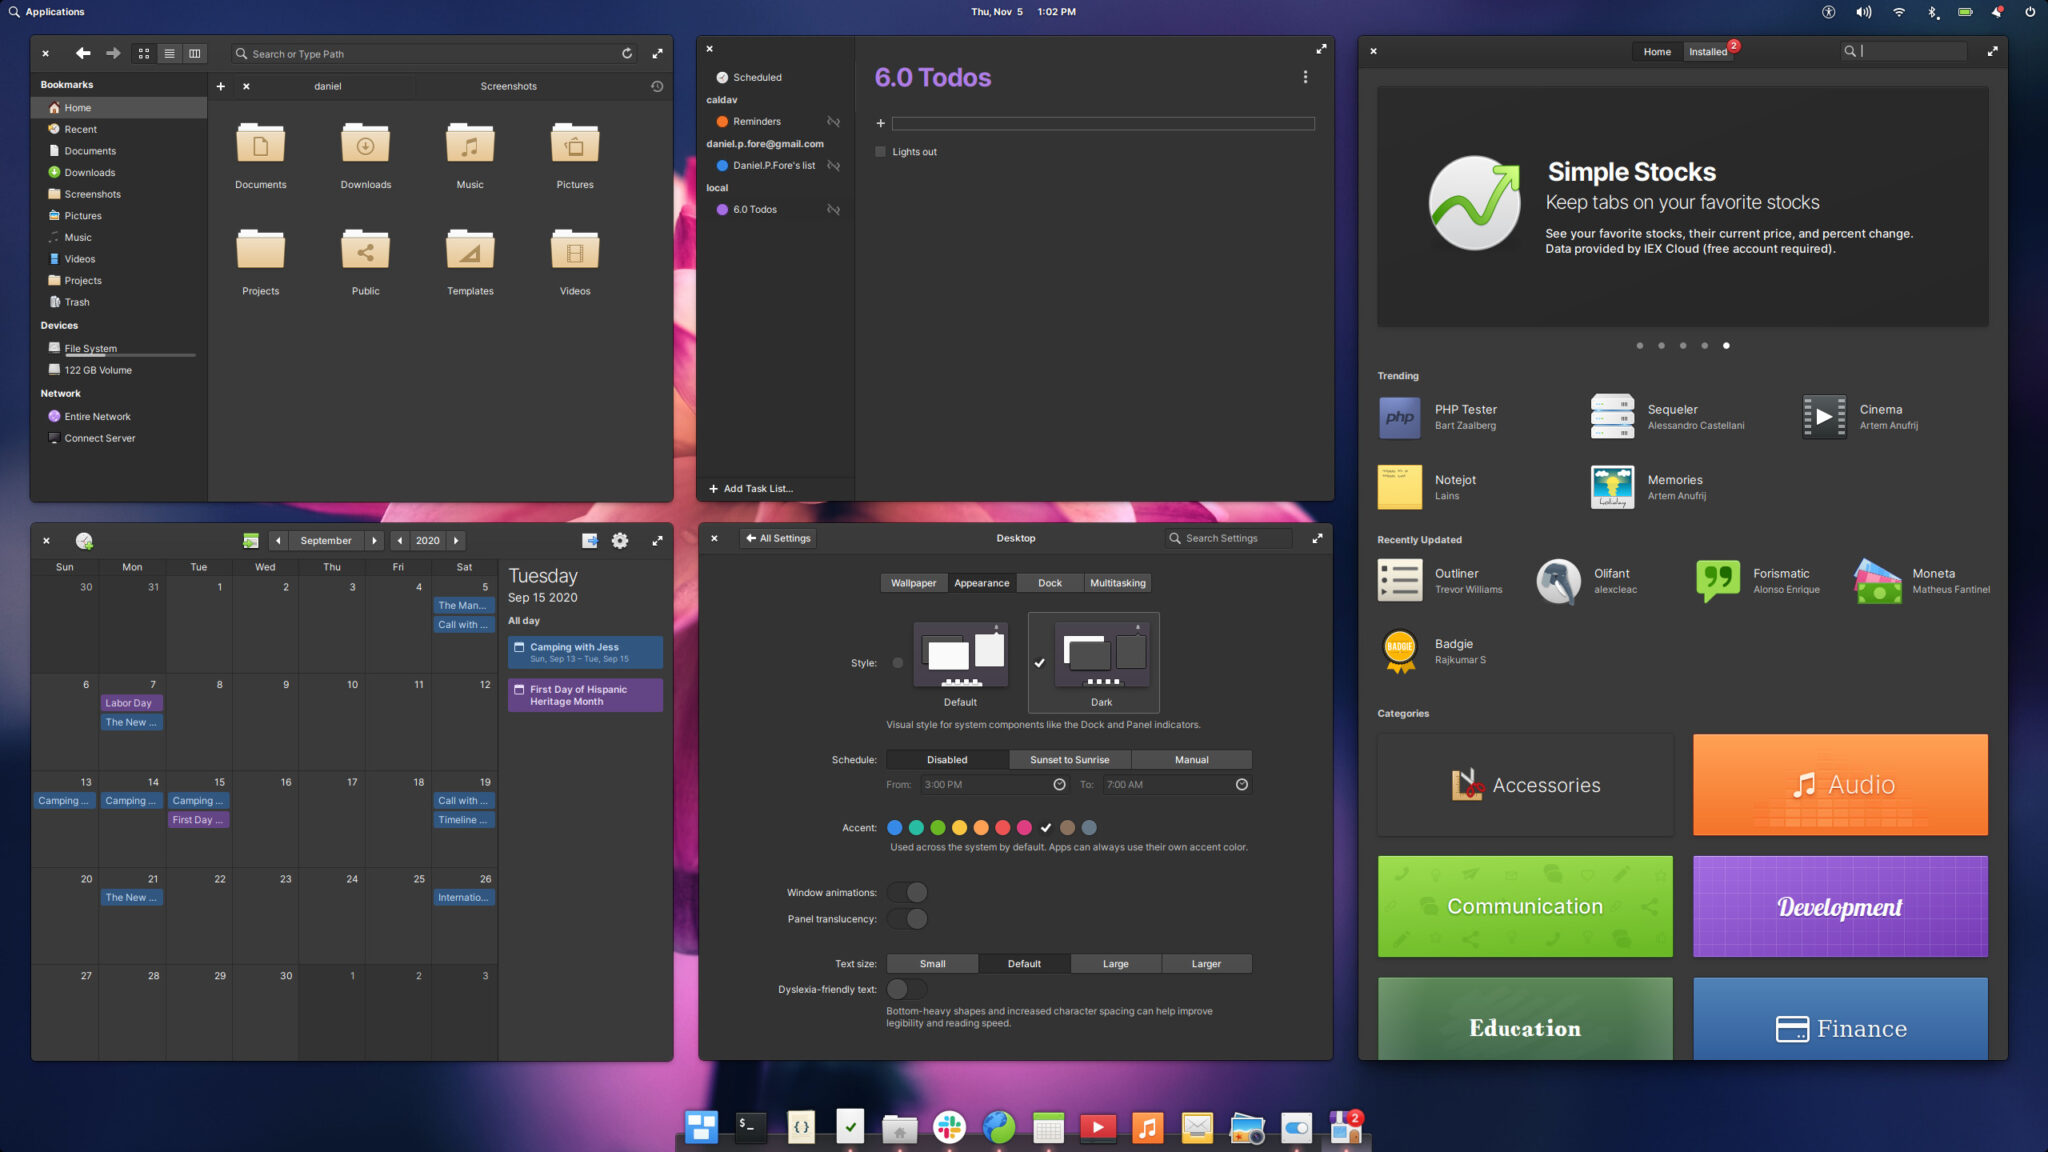 The 5 Most Beautiful Linux Distros